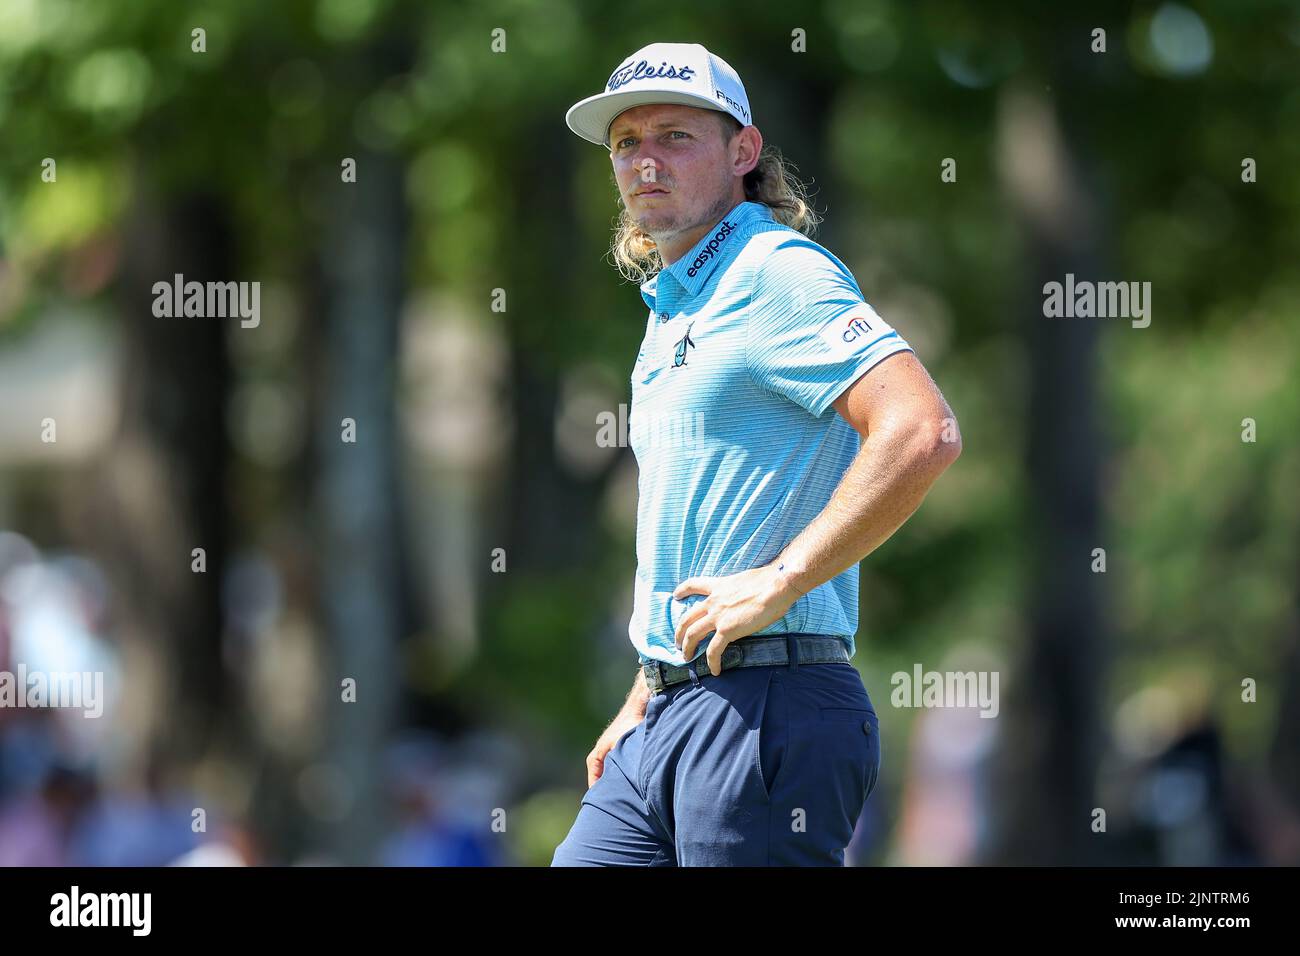 August 13, 2022: Cameron Smith looks on during the third round of the FedEx St. Jude Championship golf tournament at TPC Southwind in Memphis, TN. Gray Siegel/Cal Sport Media Stock Photo